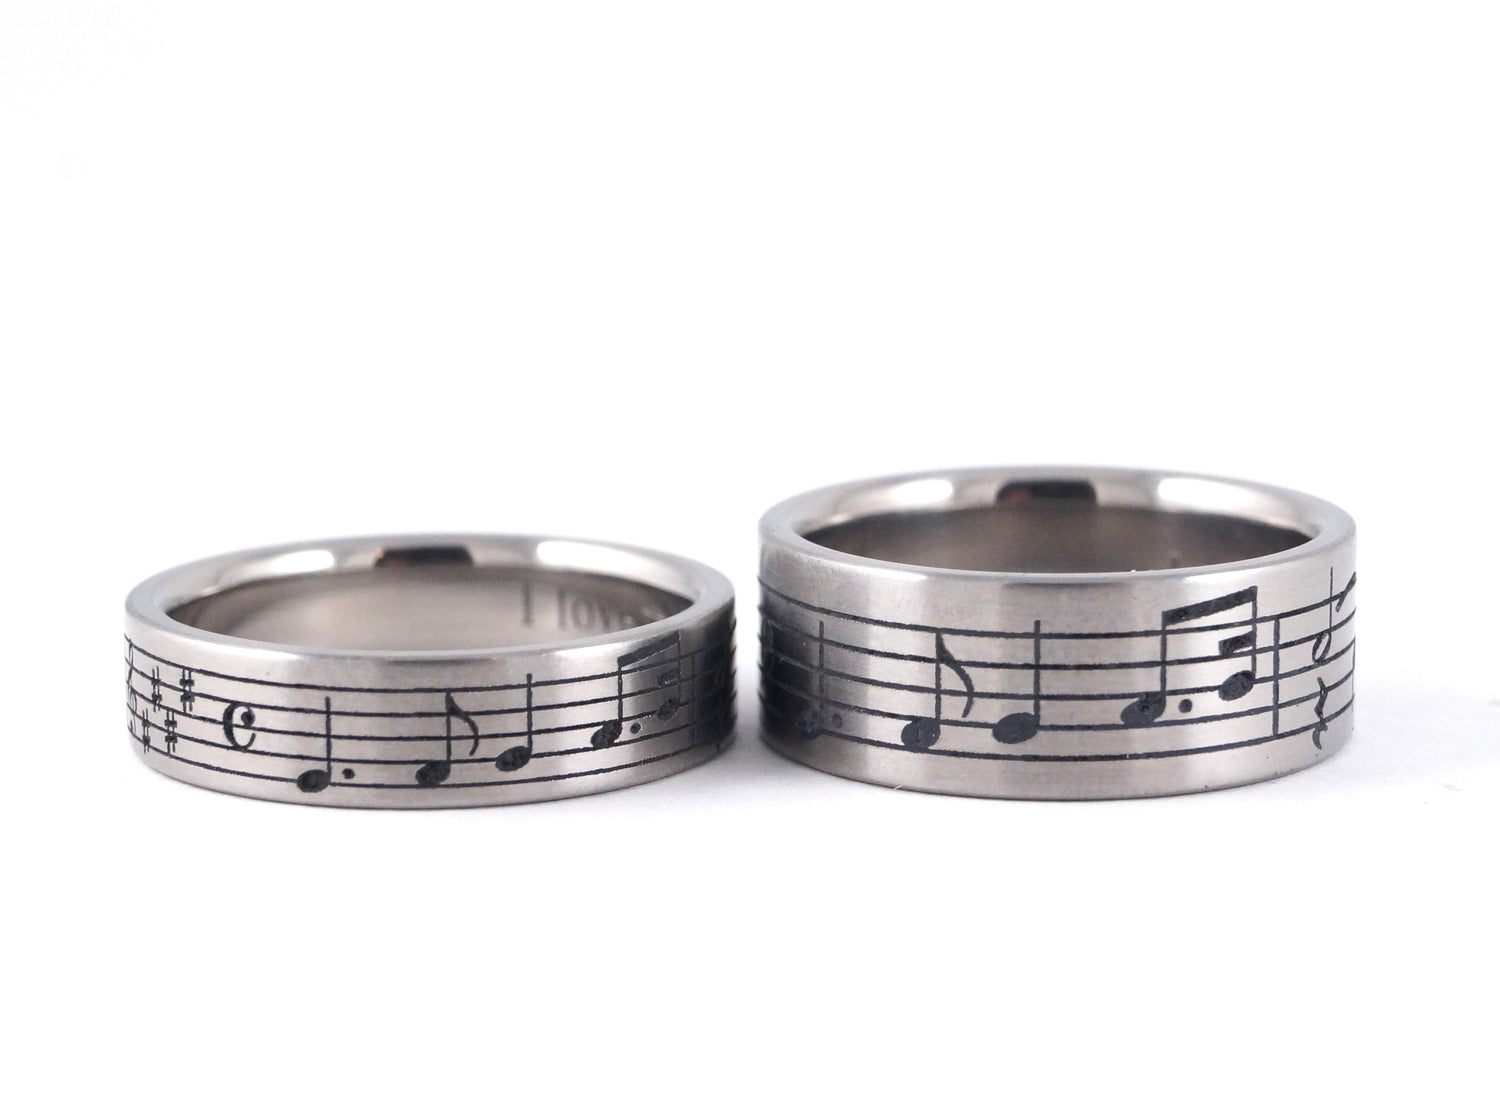 Custom Titanium Music Note Wedding Ring Set 2 Rings Unique Wedding band Music Gifts for him Geekery Alternative Non Traditional Custom Notes